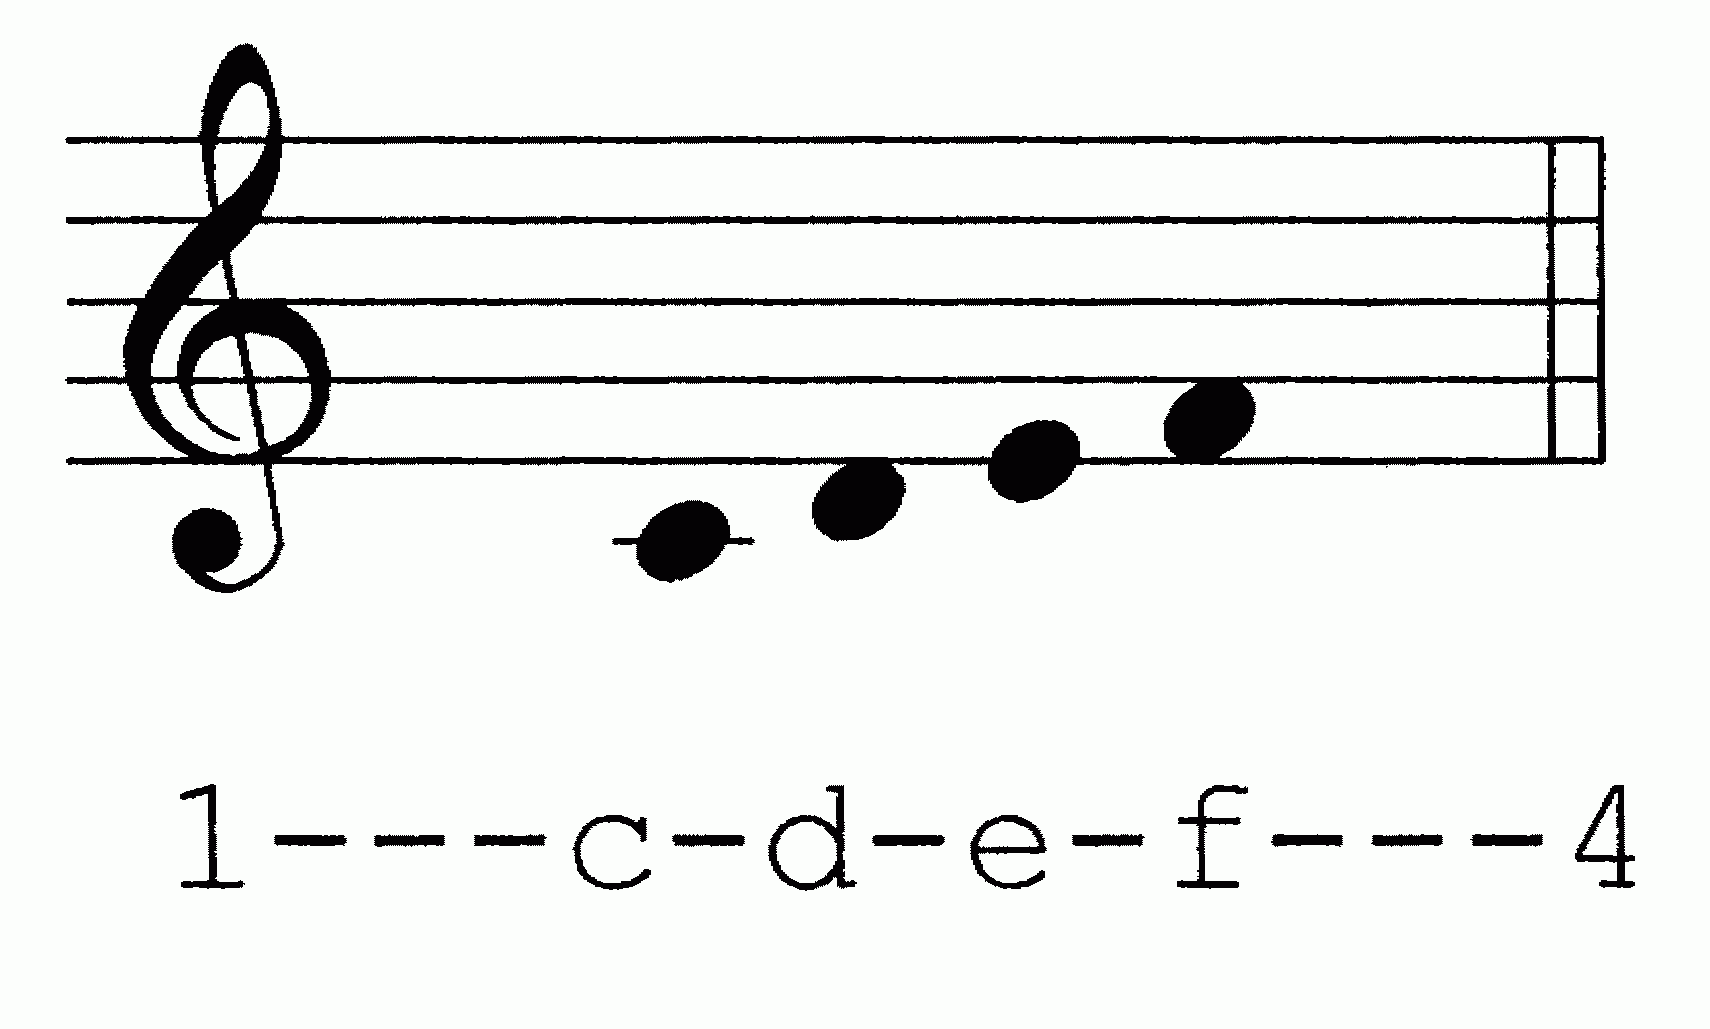 Volpiano font applied to a data-string.